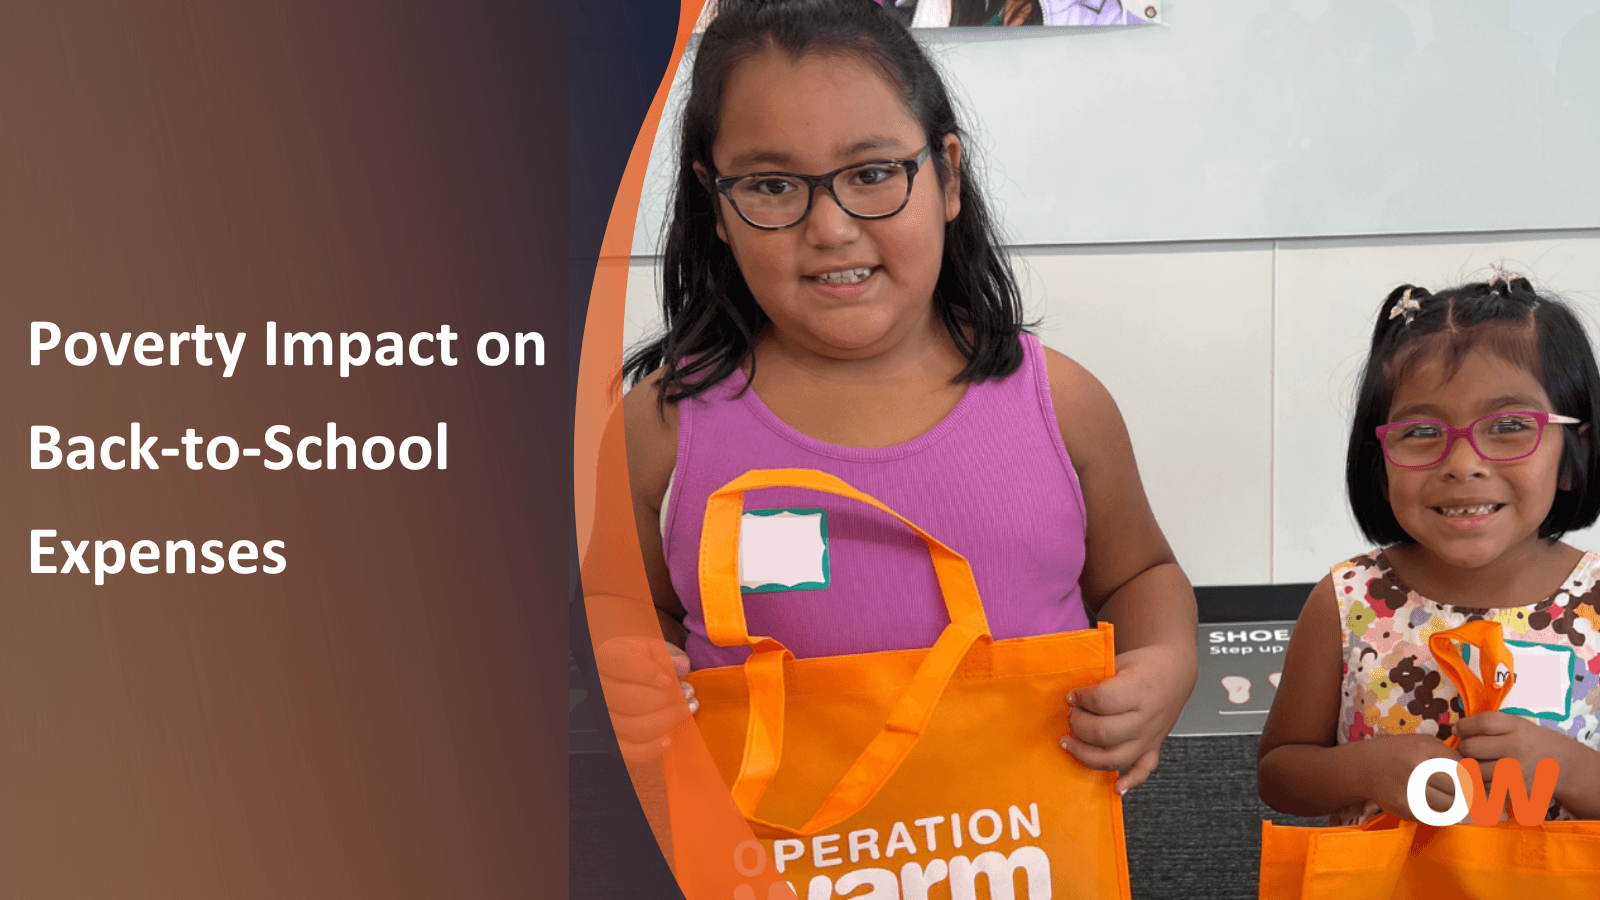 Affording Back-to-School Expenses: The Impact of Poverty & How You Can Help Kids in Need